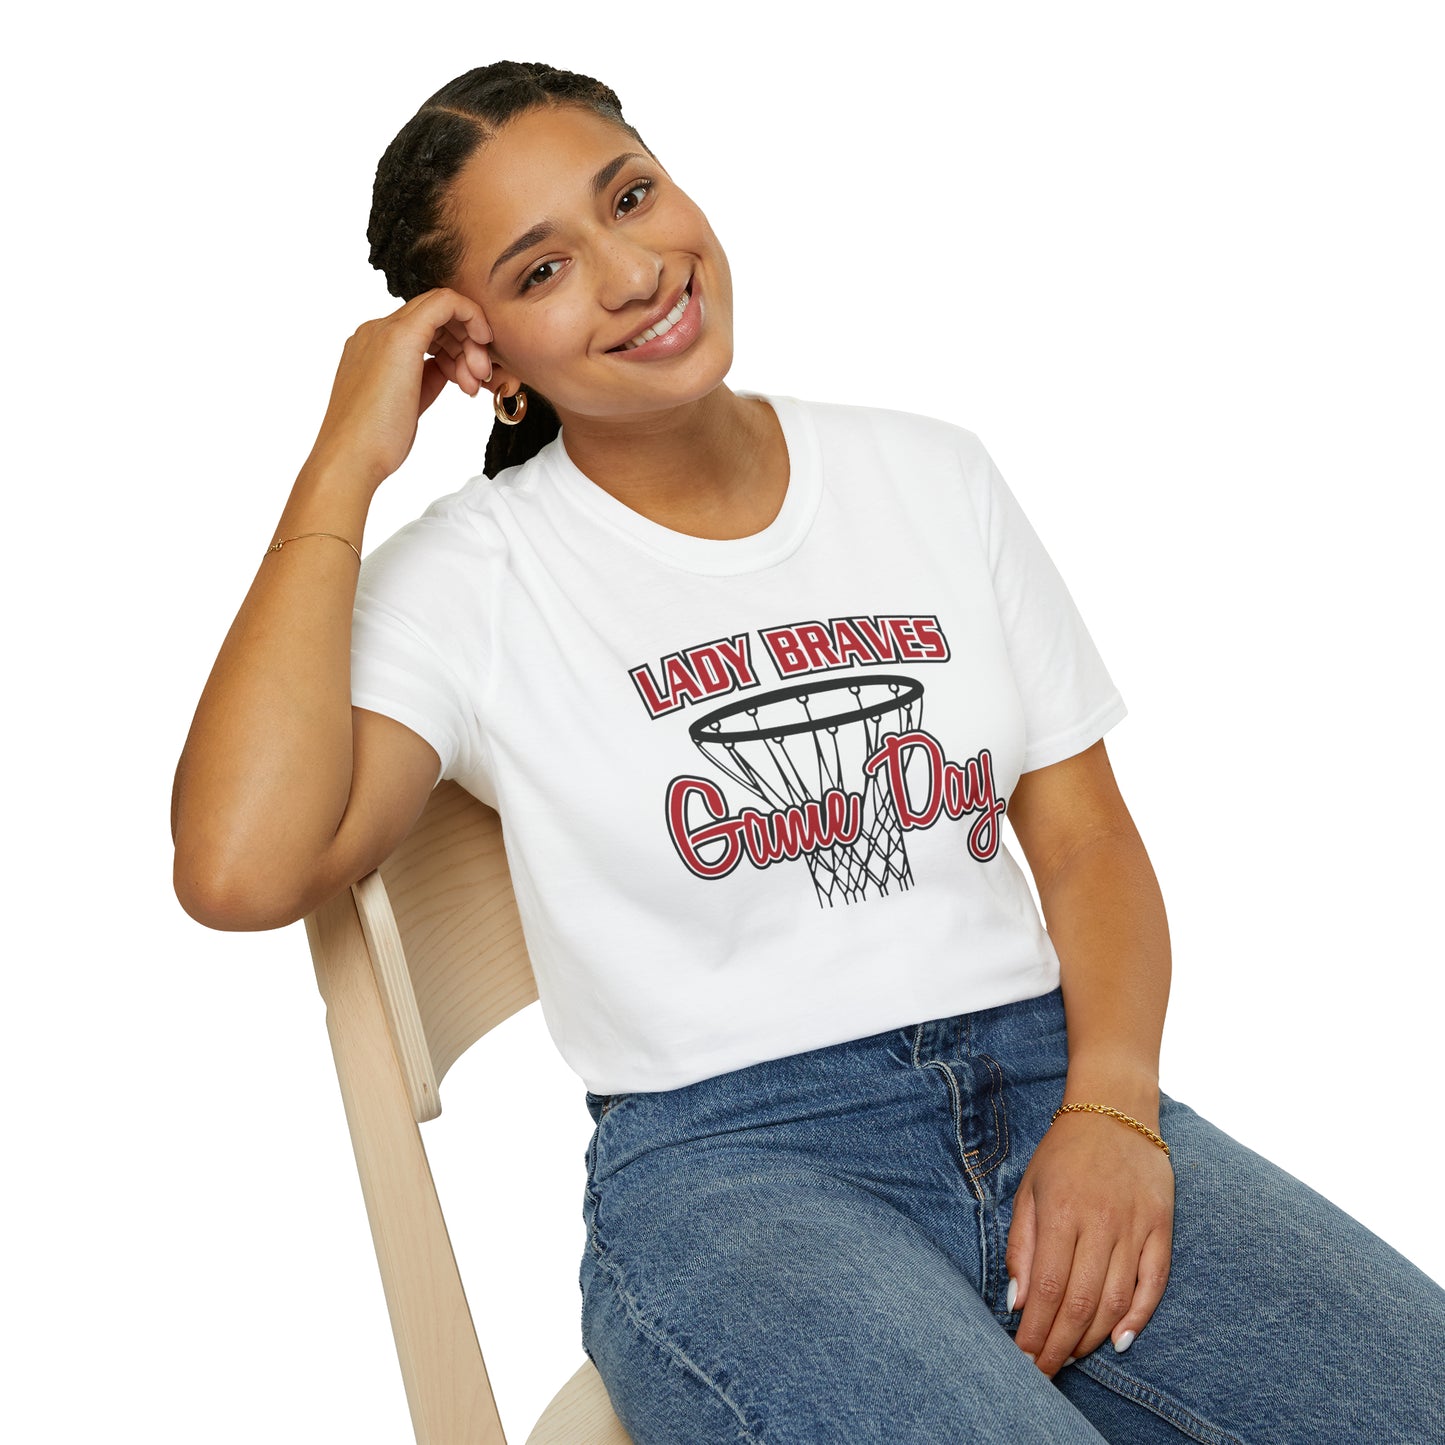 Lady Braves Basketball Game Day Unisex Softstyle T-Shirt